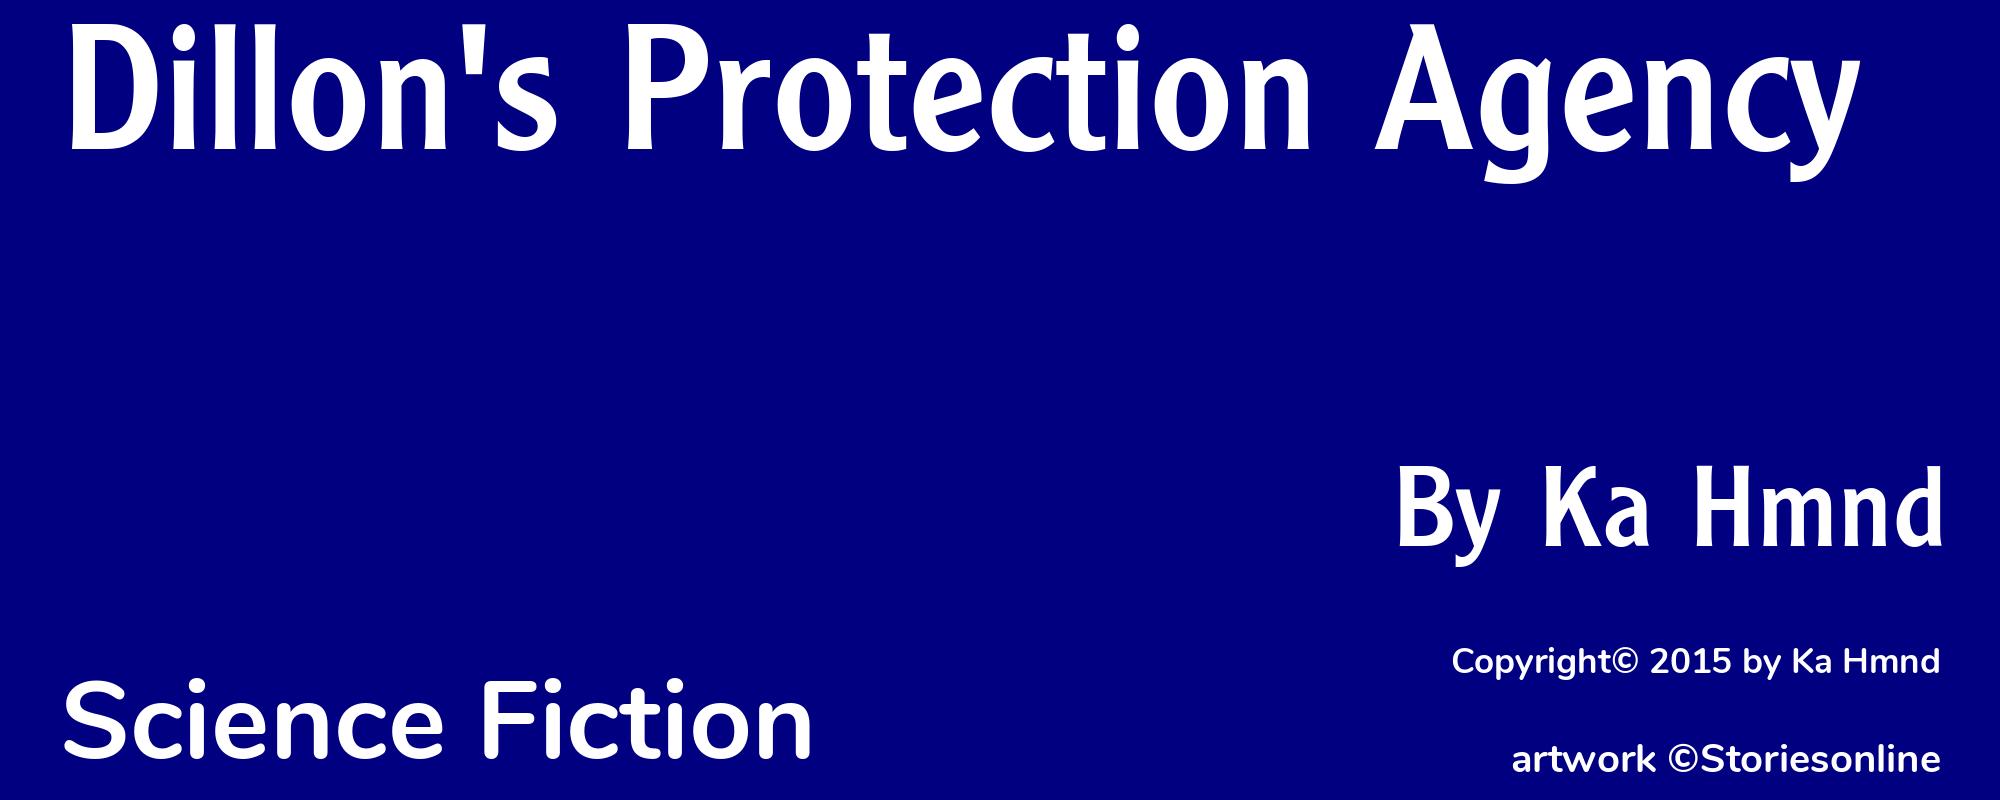 Dillon's Protection Agency - Cover